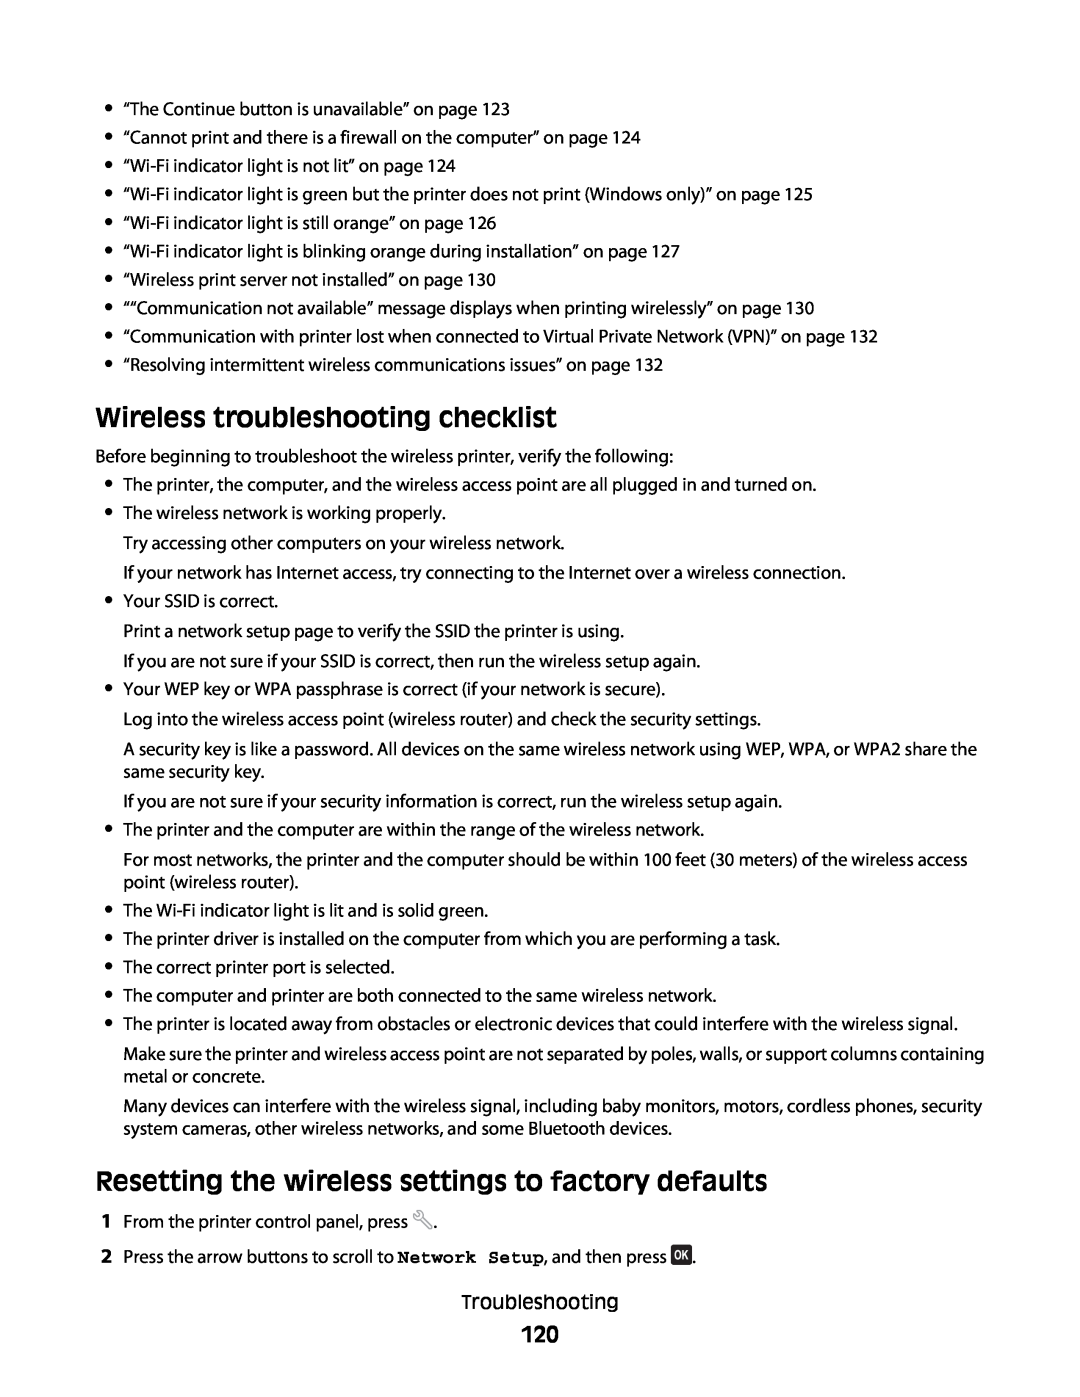 Dell V515W manual Wireless troubleshooting checklist, Resetting the wireless settings to factory defaults 